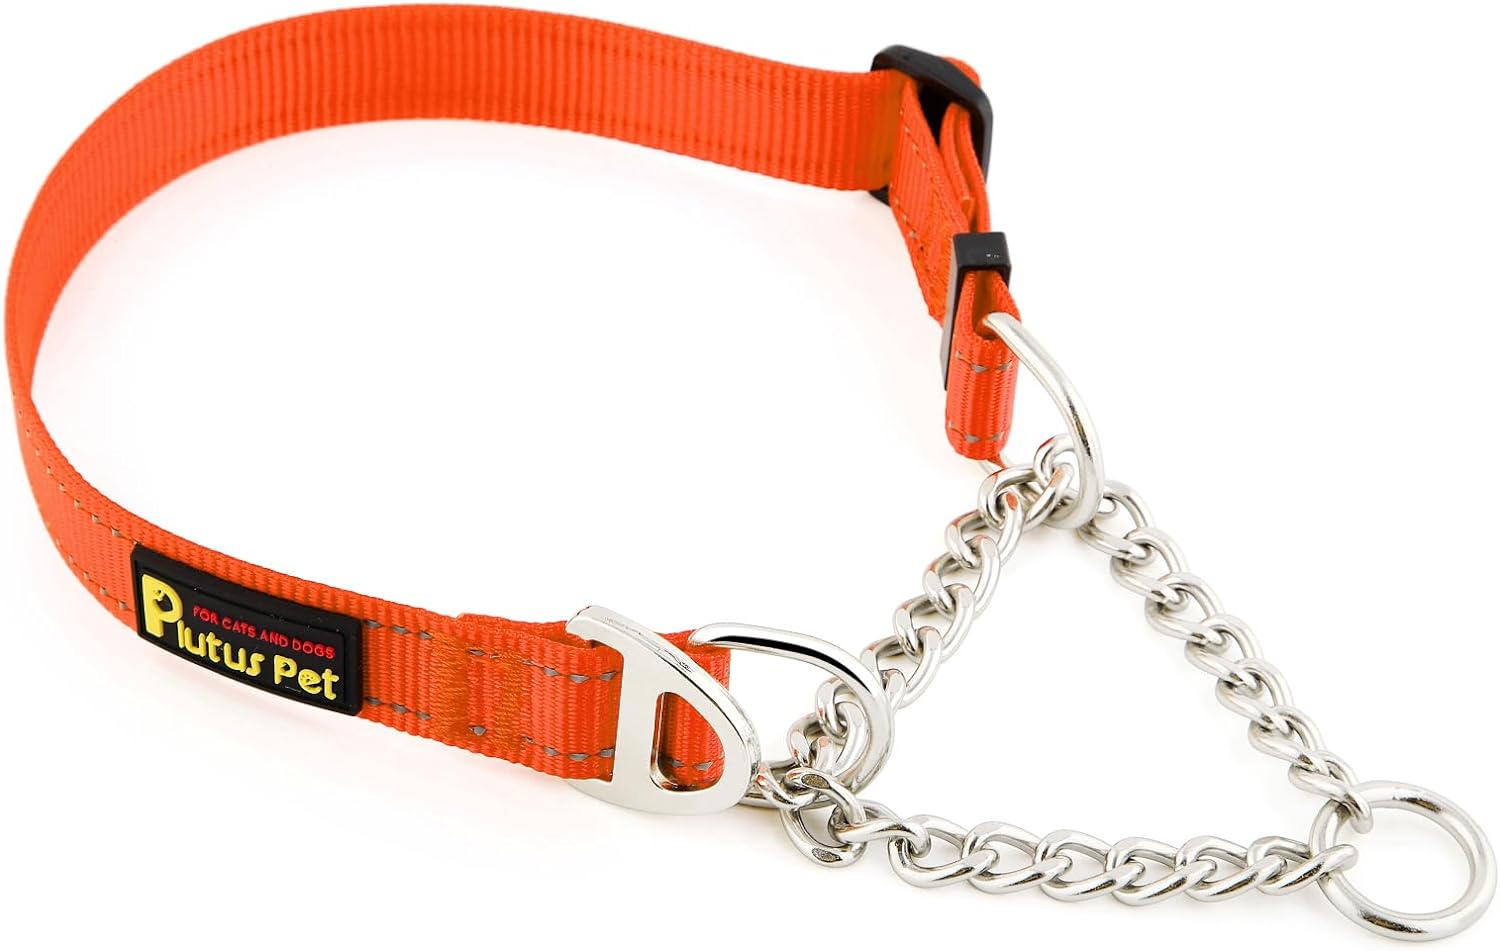 Plutus Pet Martingale Dog Collar with Stainless Steel Chain and Reflective Nylon, Adjustable No Pull Training Collar, for Small Medium, and Large Dogs, Orange, L